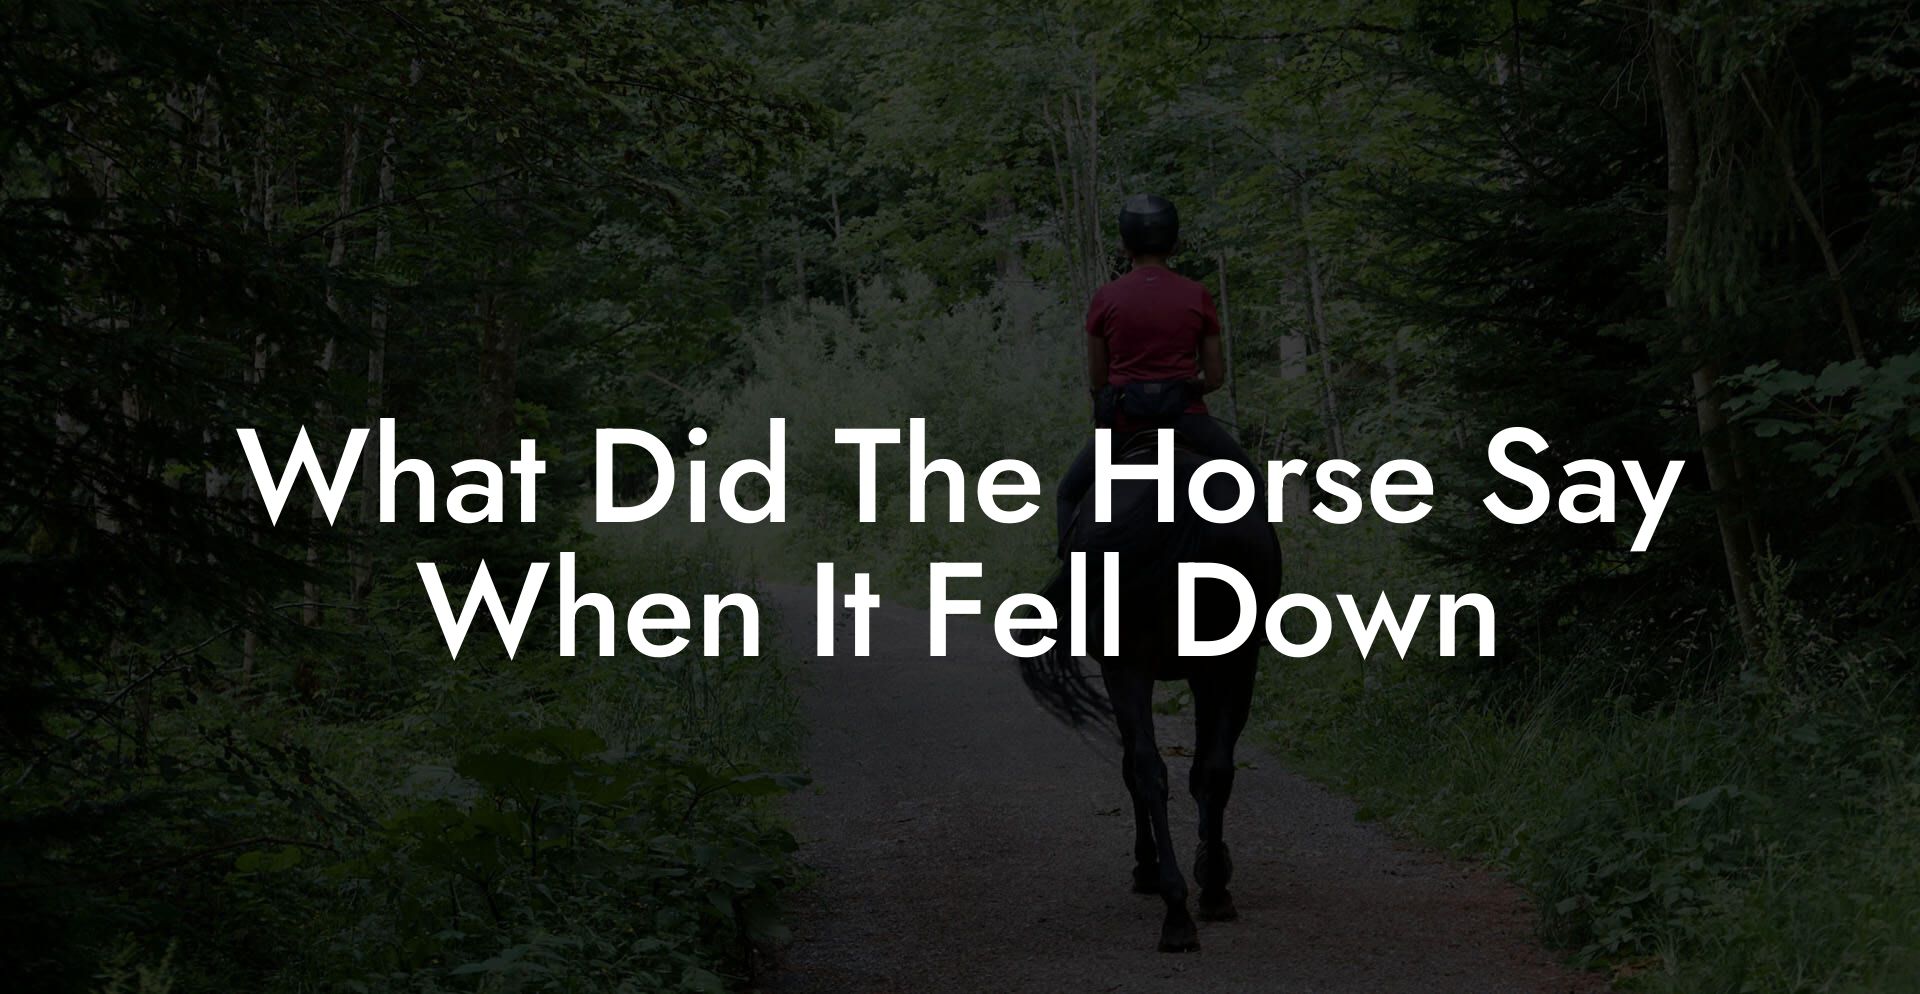 What Did The Horse Say When It Fell Down